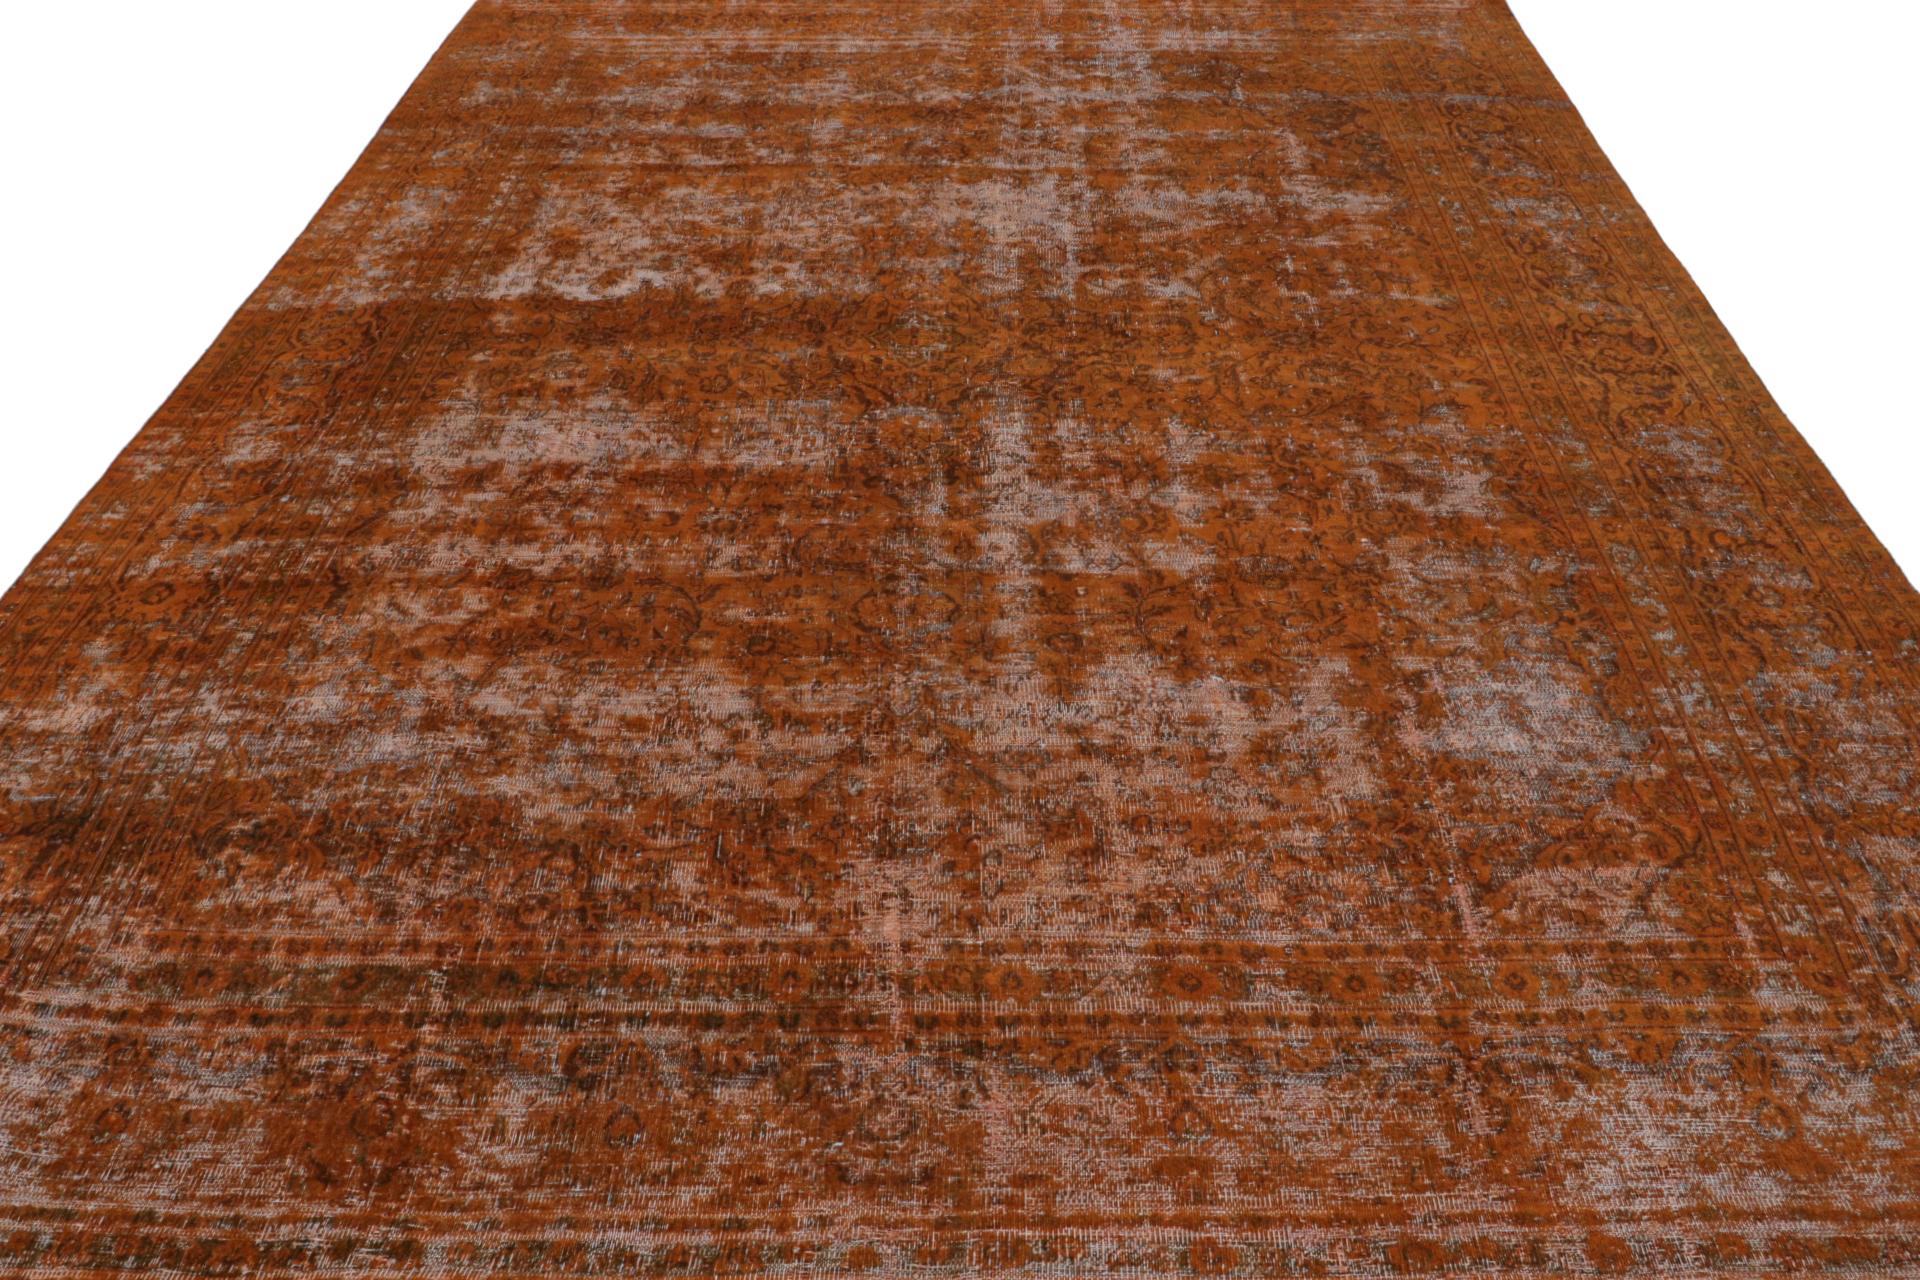 Hand-Knotted Vintage Persian Rug in Rust Orange and Brown Floral Patterns, From Rug & Kilim For Sale